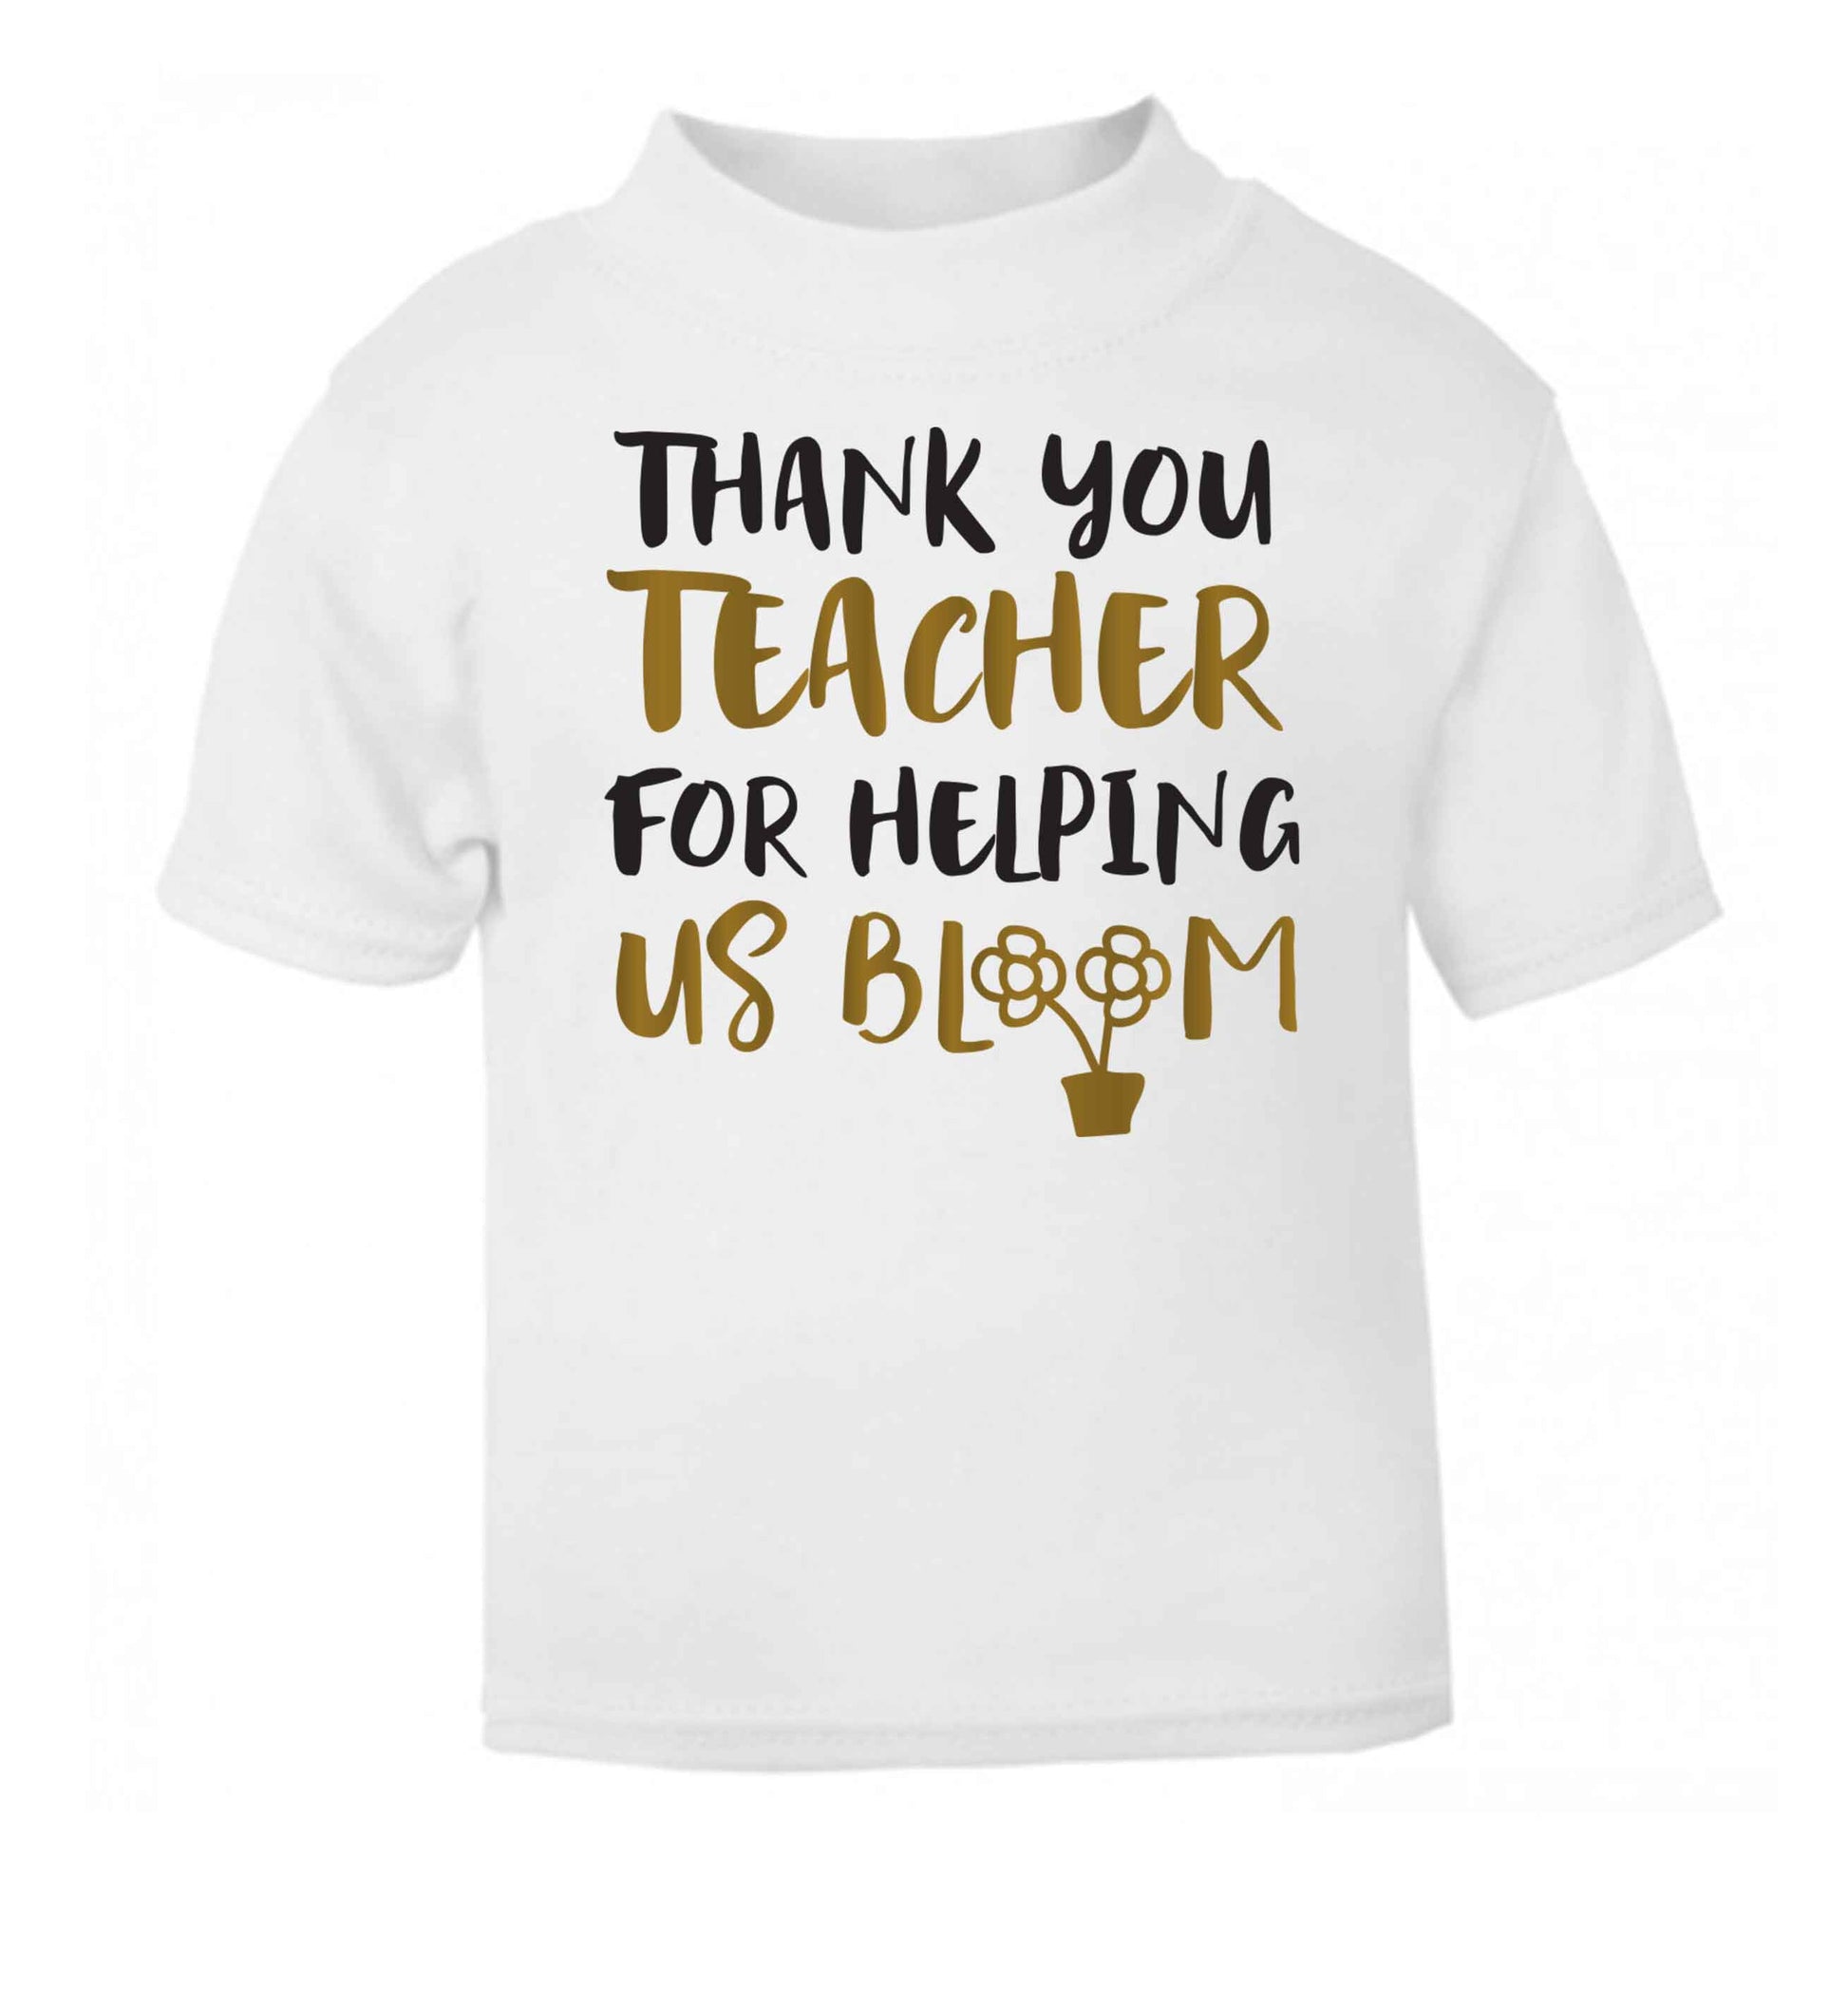 Thank you teacher for helping us bloom white Baby Toddler Tshirt 2 Years